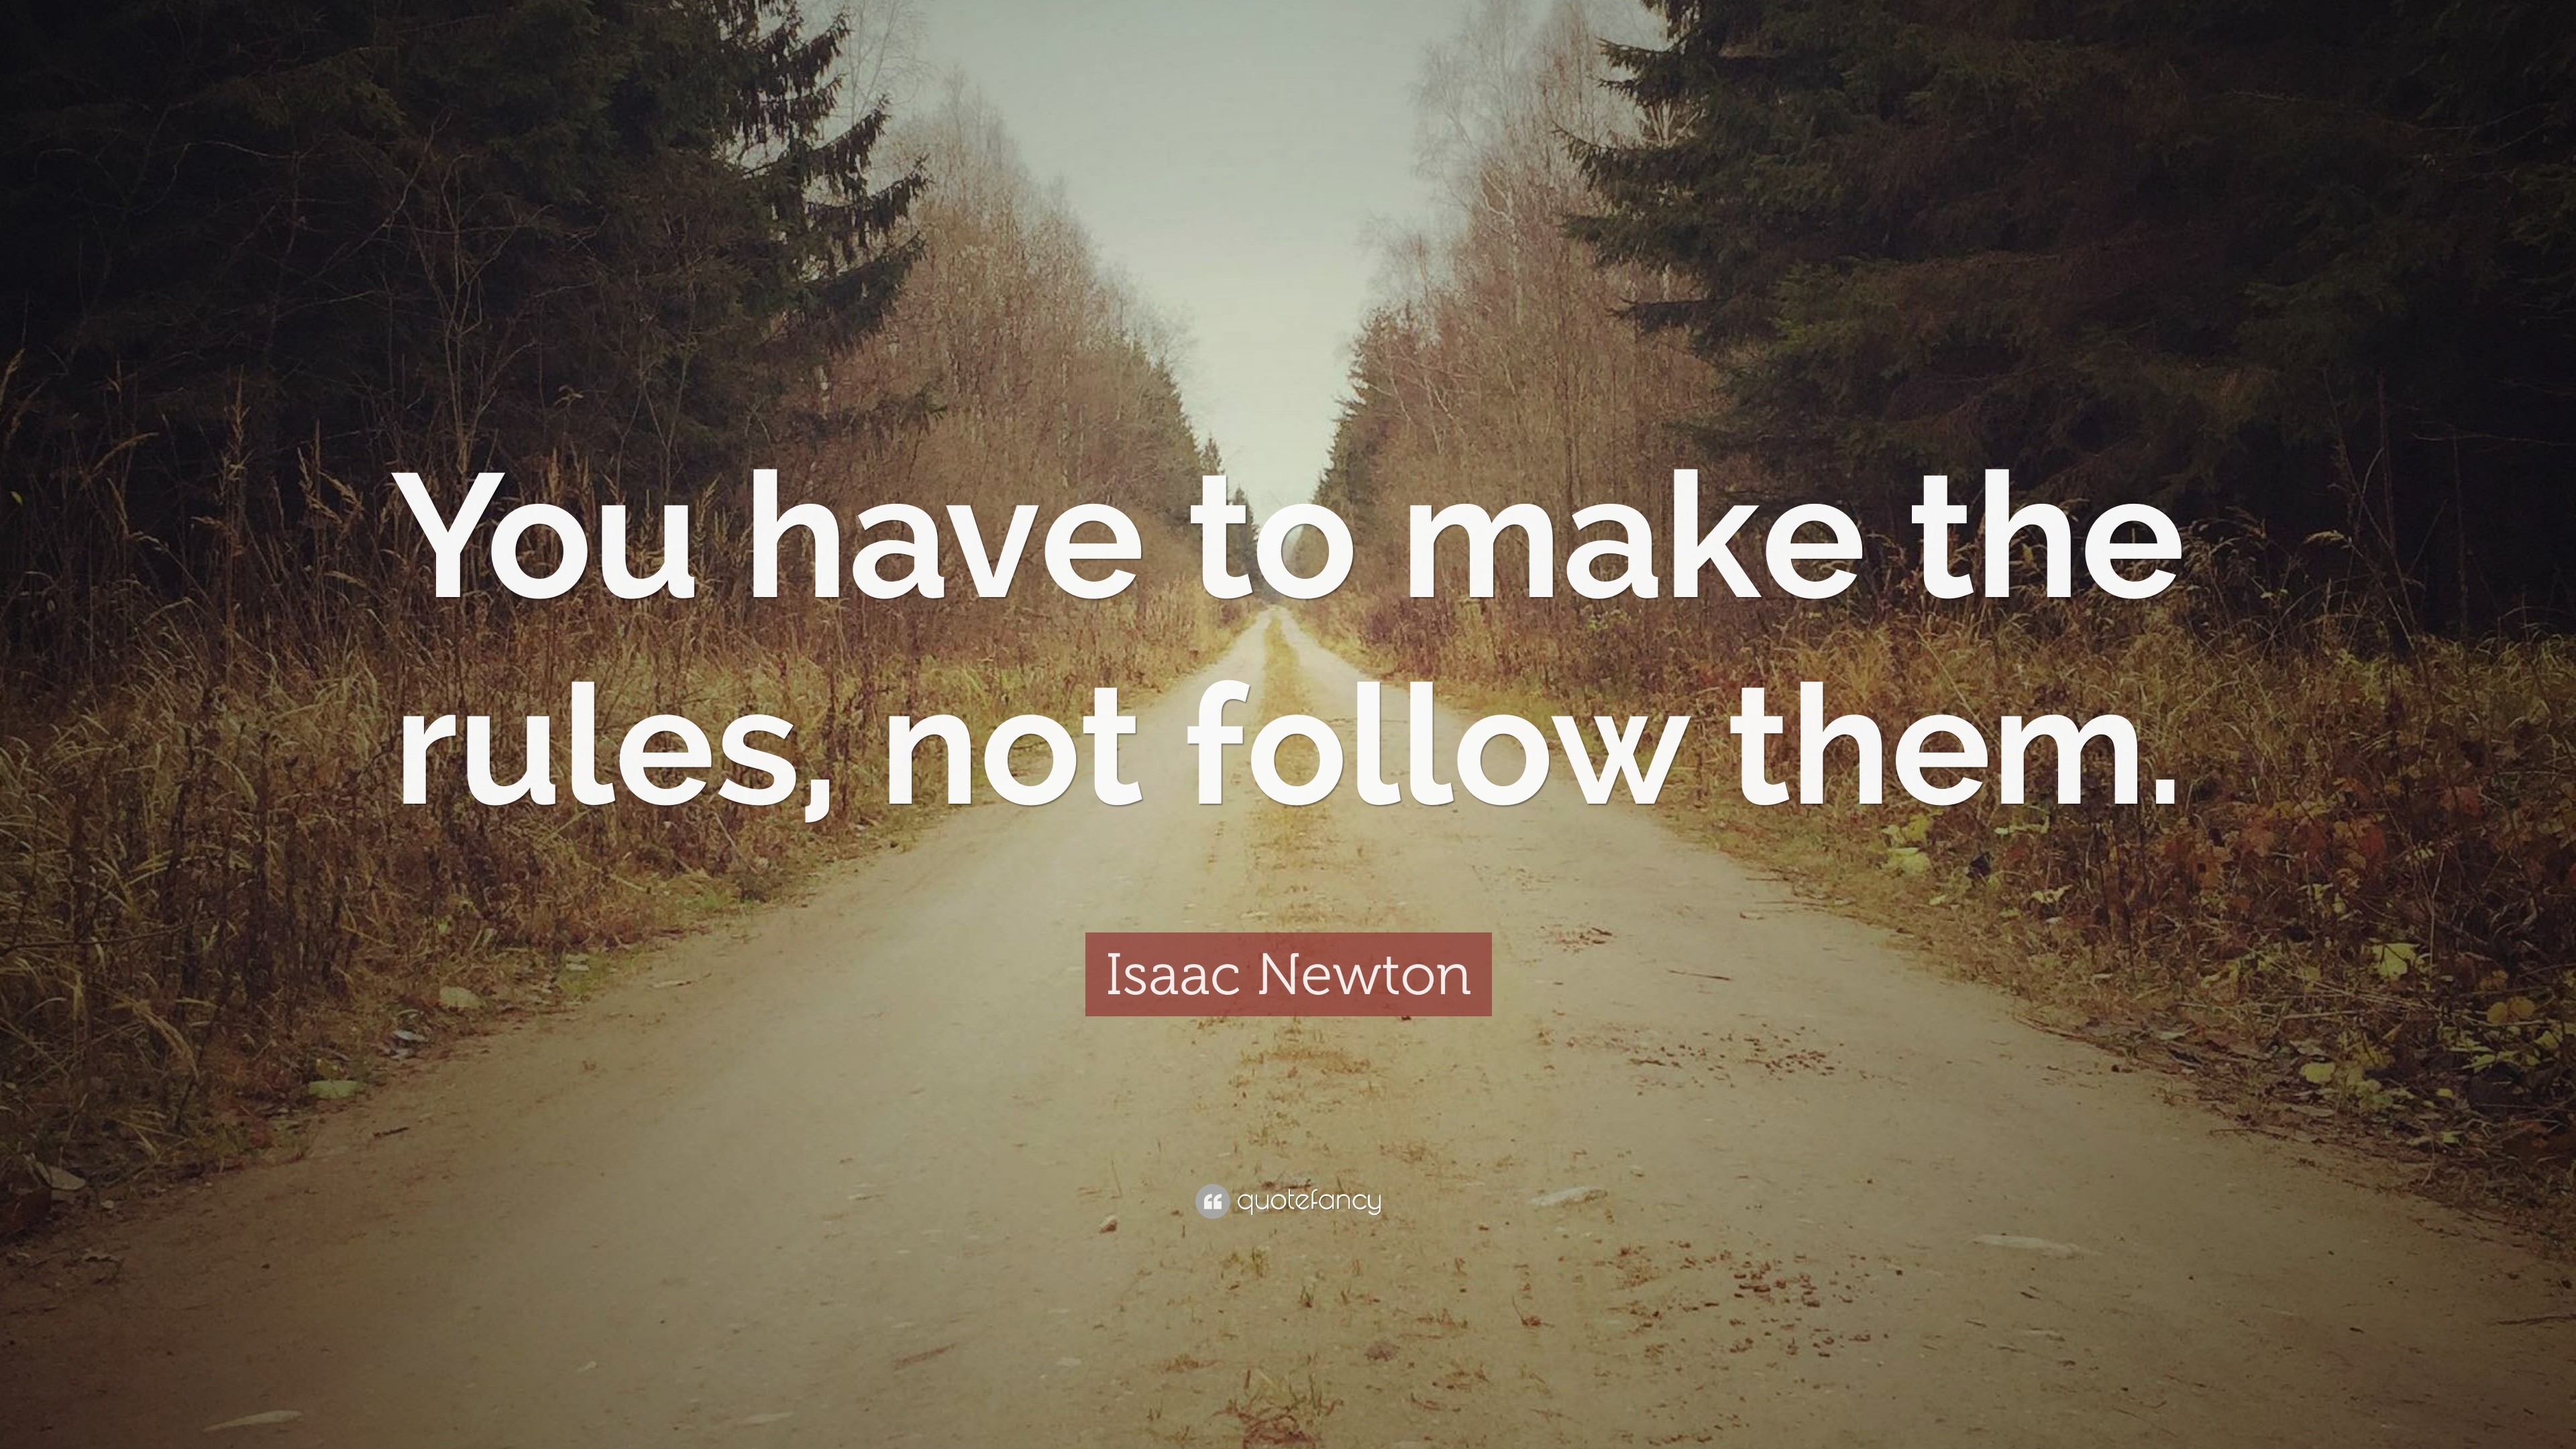 3840x2160 Isaac Newton Quote: “You have to make the rules, not follow them.